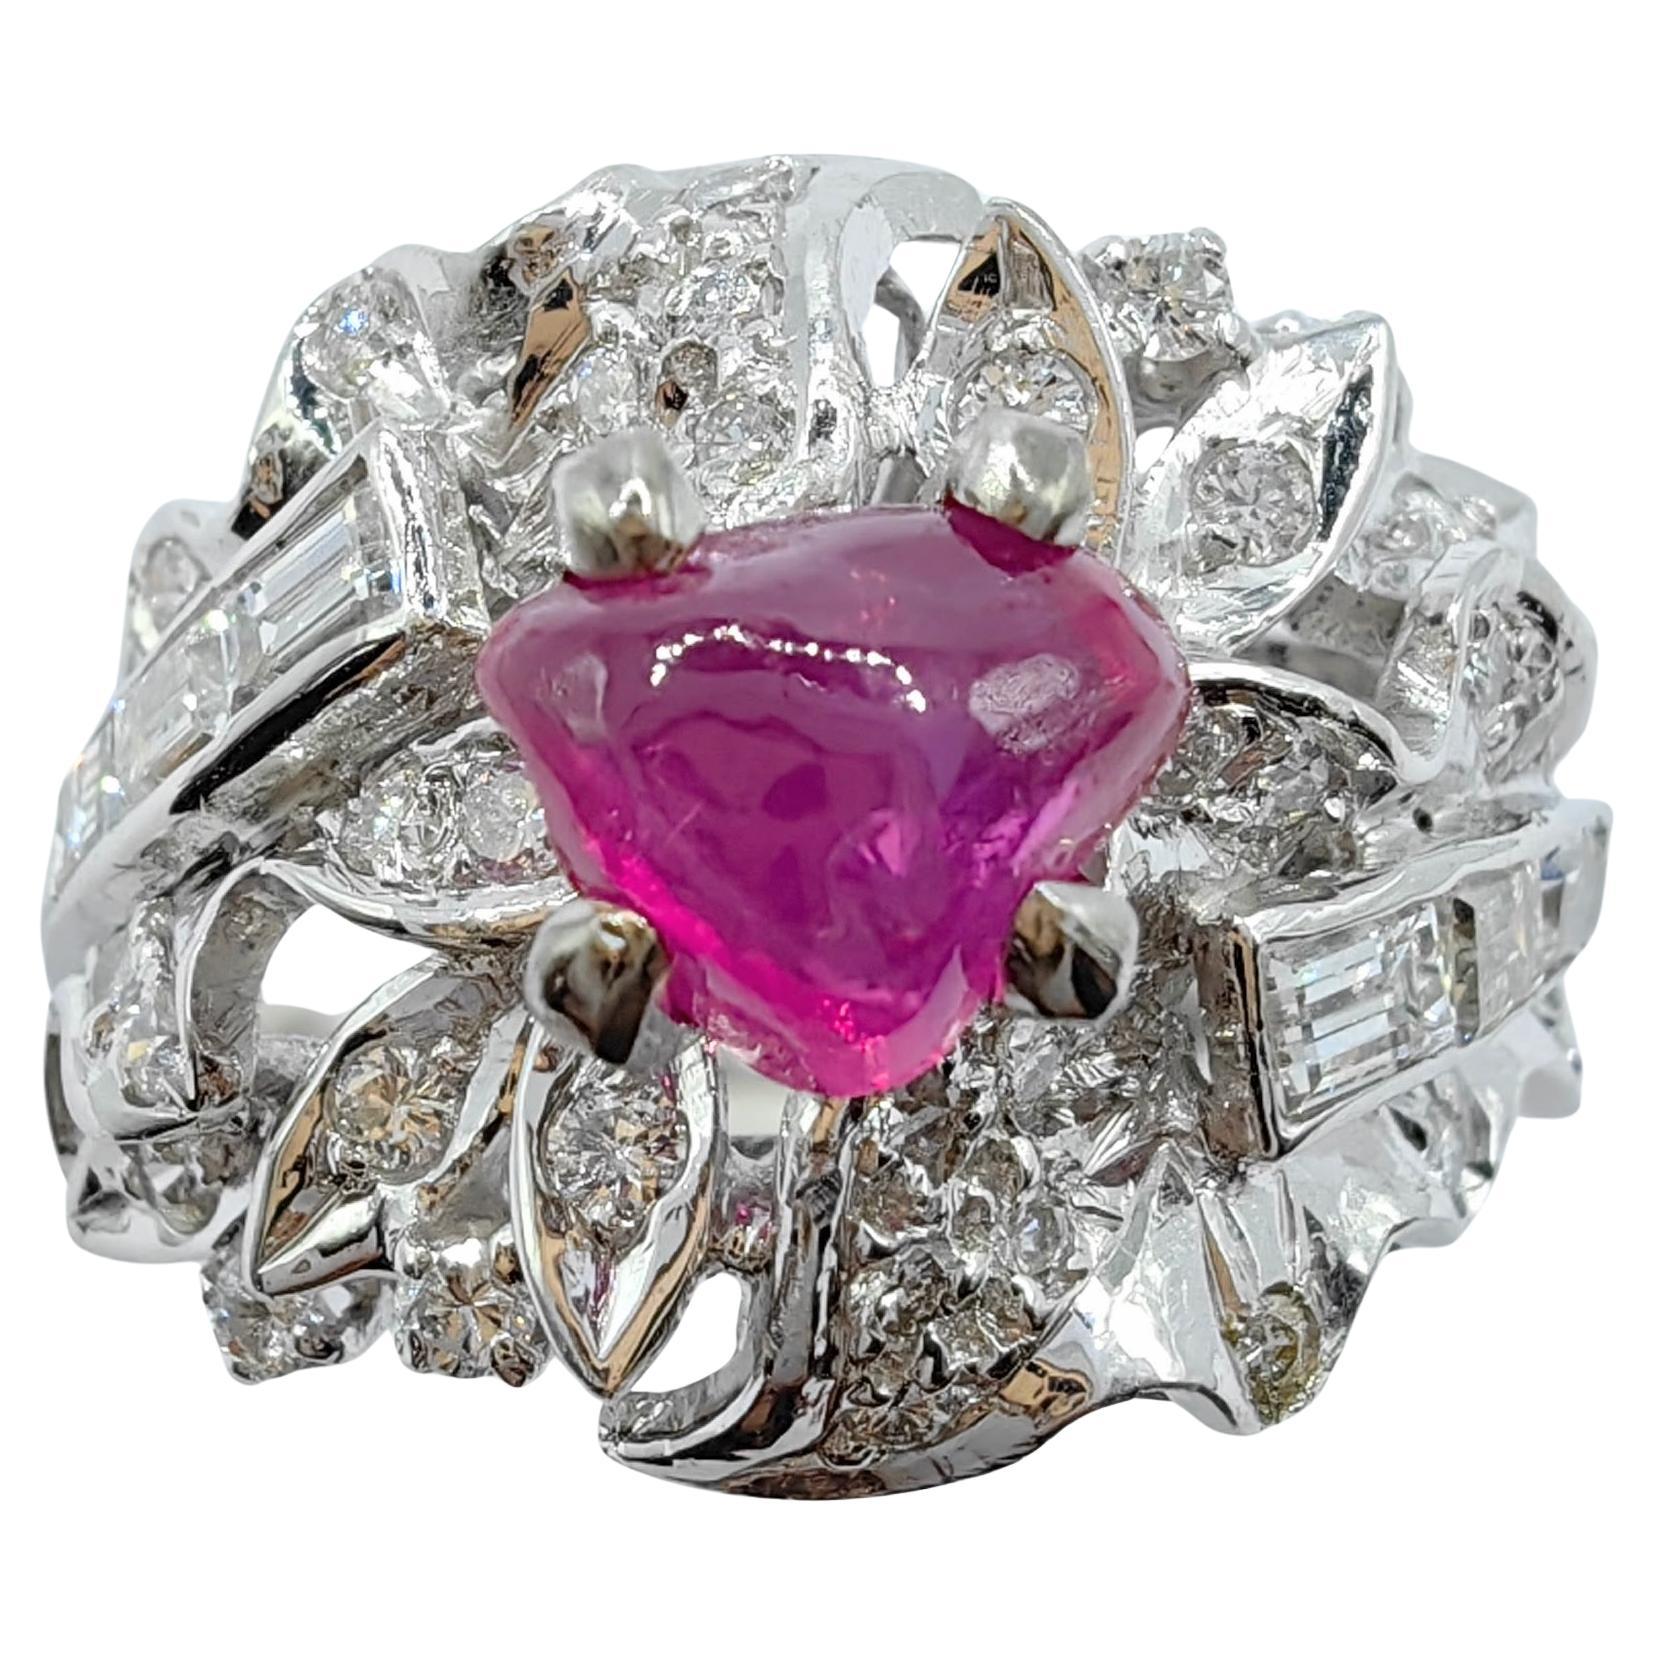 One-of-a-kind Vintage 1.52ct Freeform Ruby Edwardian Diamond Ring in Platinum